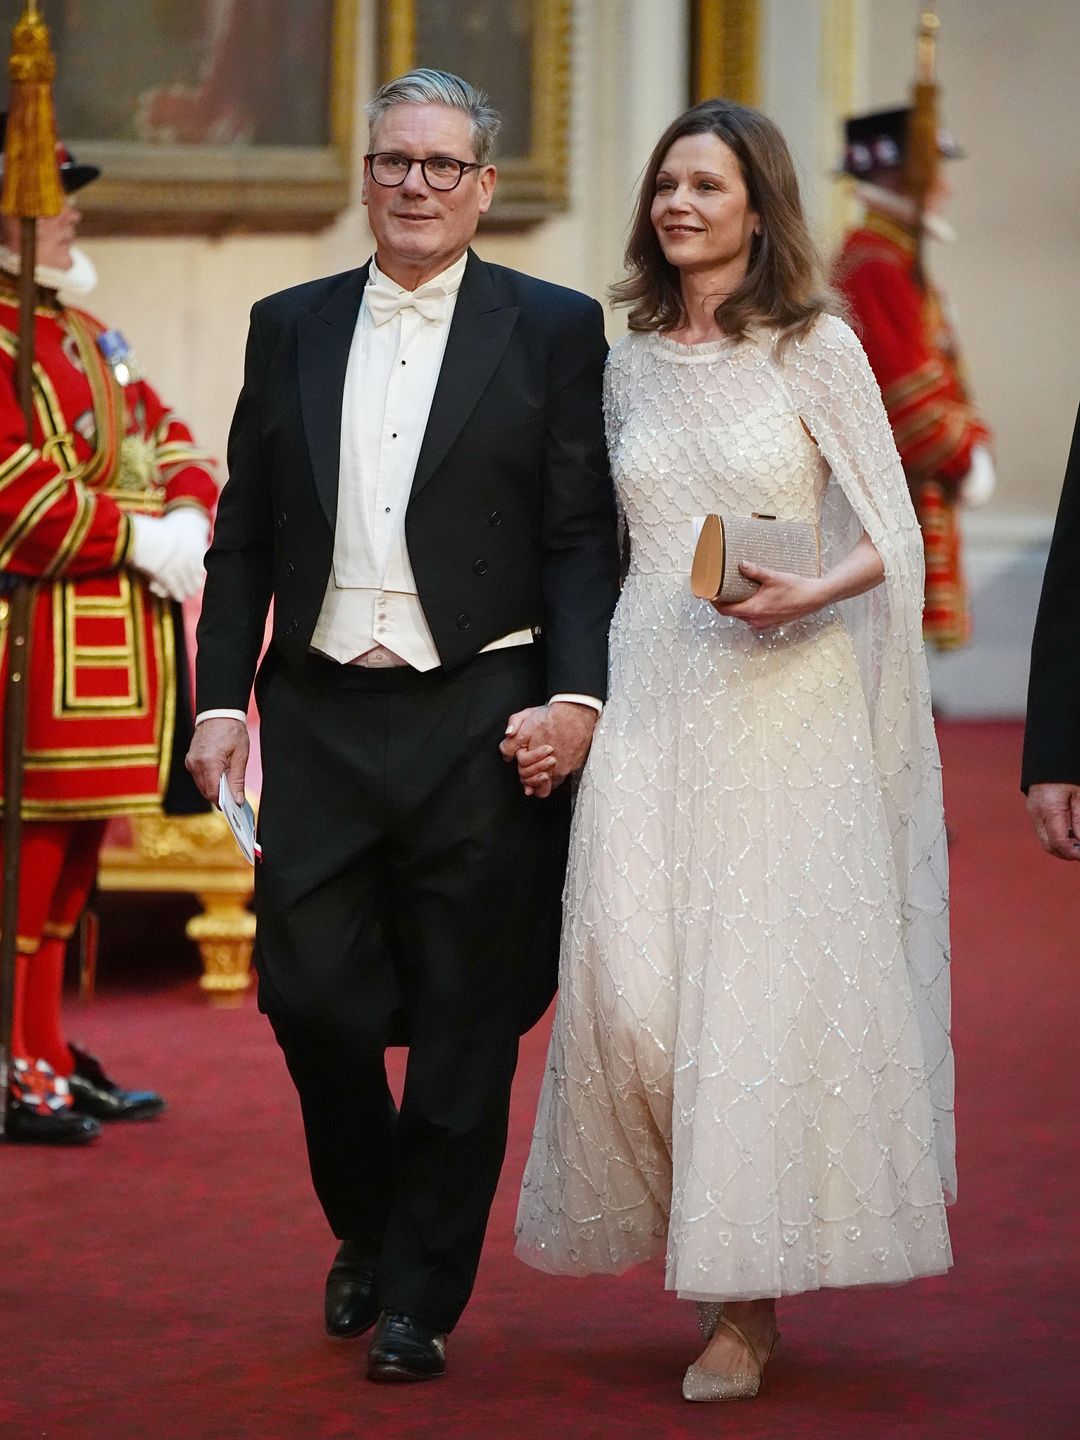 Keir Starmer and wife Victoria walking through Buckingham Palace